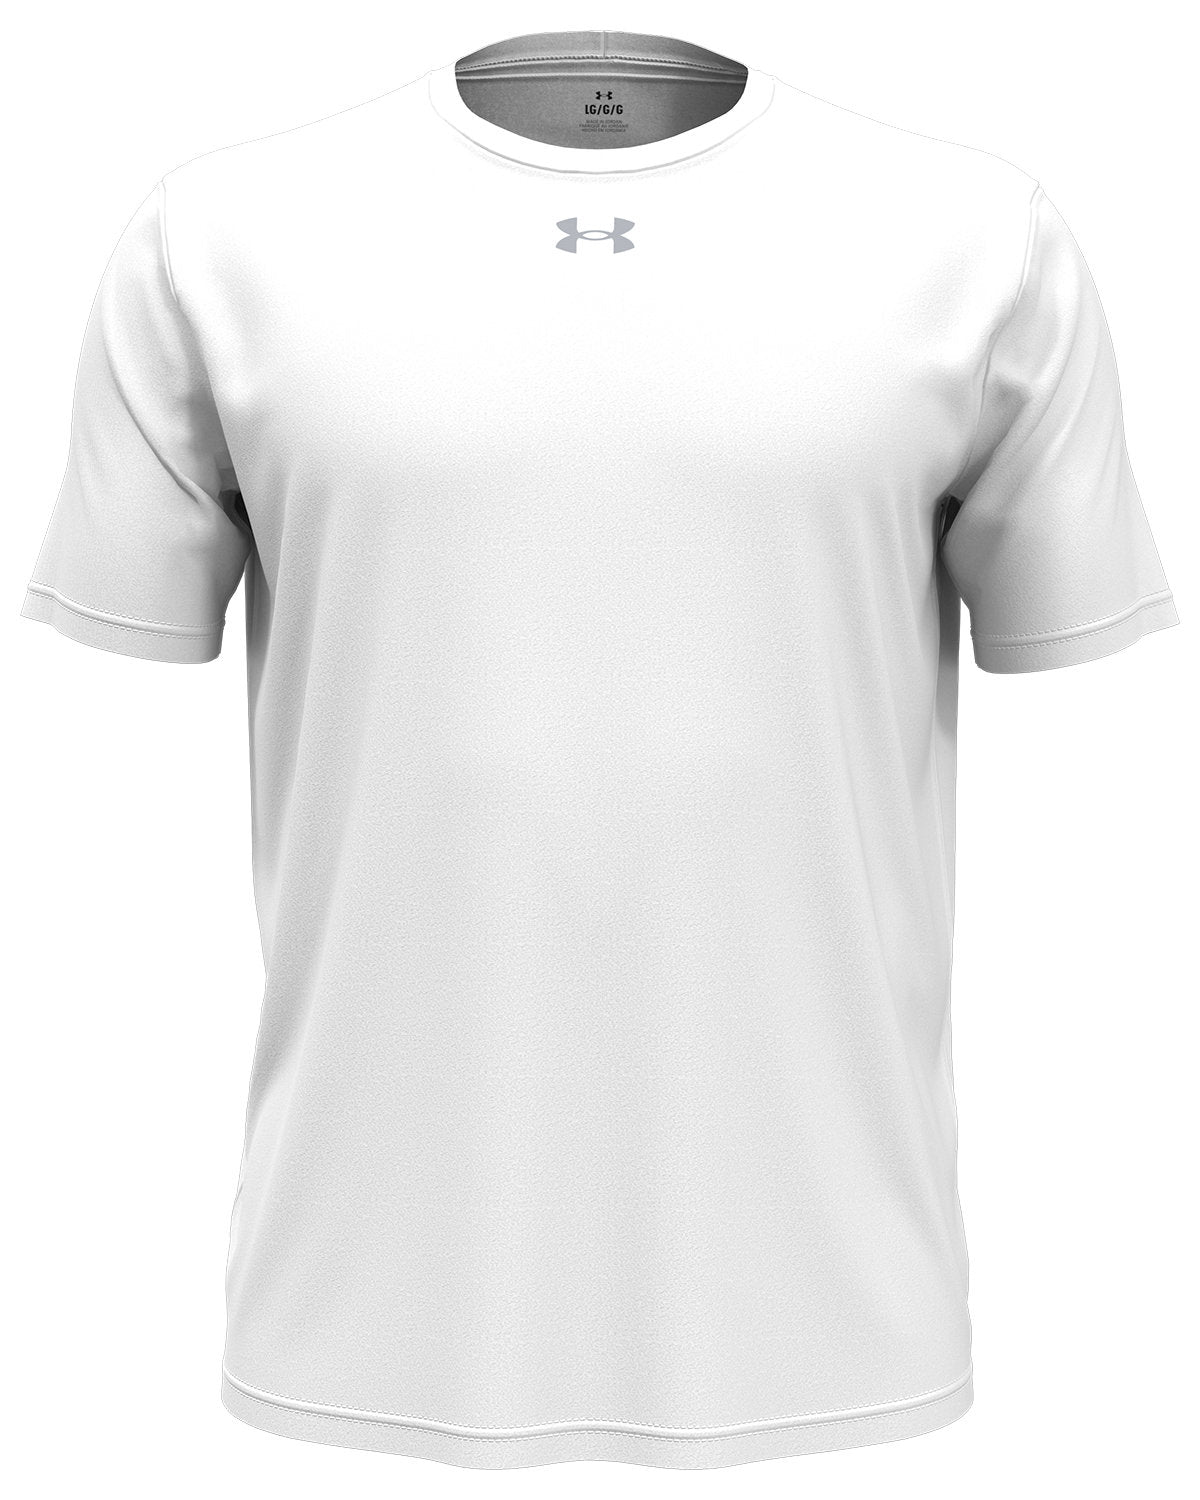 Under Armour Team Tech T-Shirt with Custom Embroidery